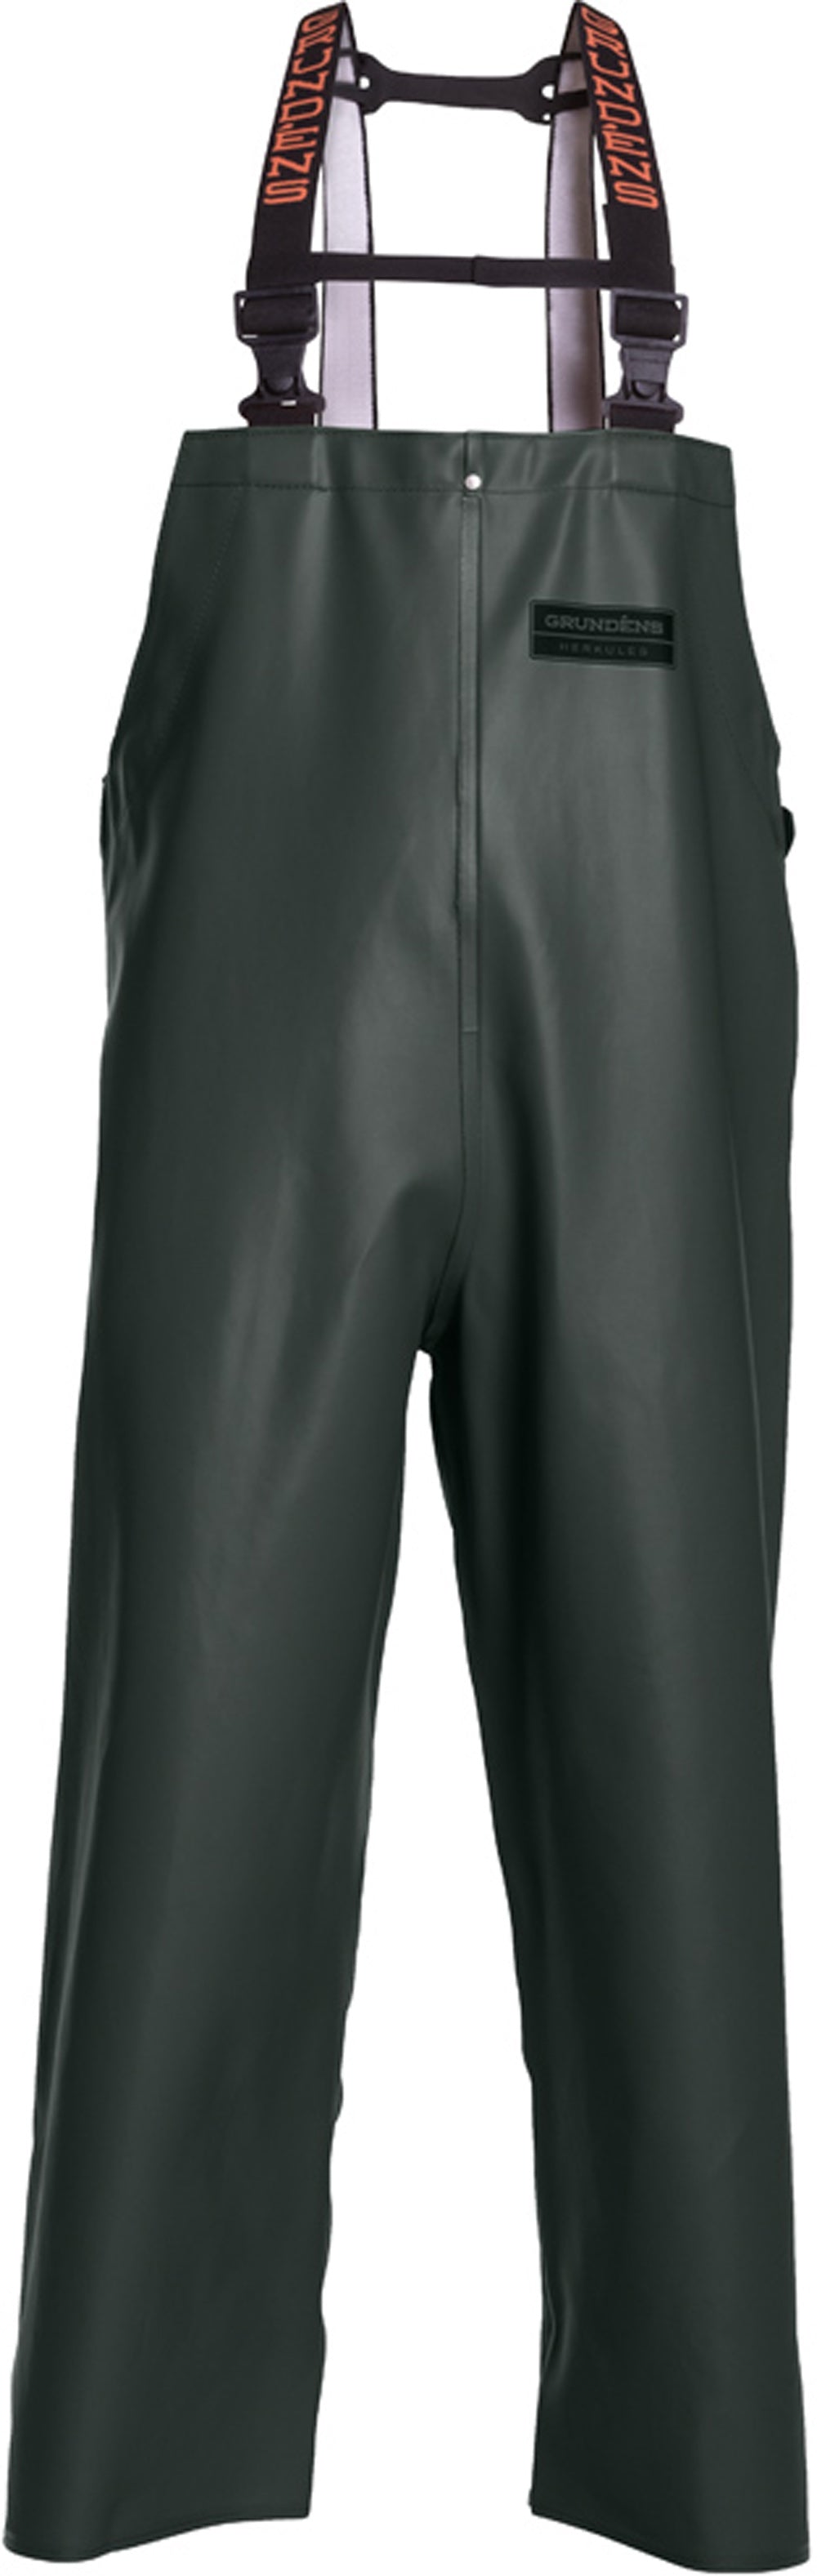 Herkules 16 Bib Pant in Green color from the front view